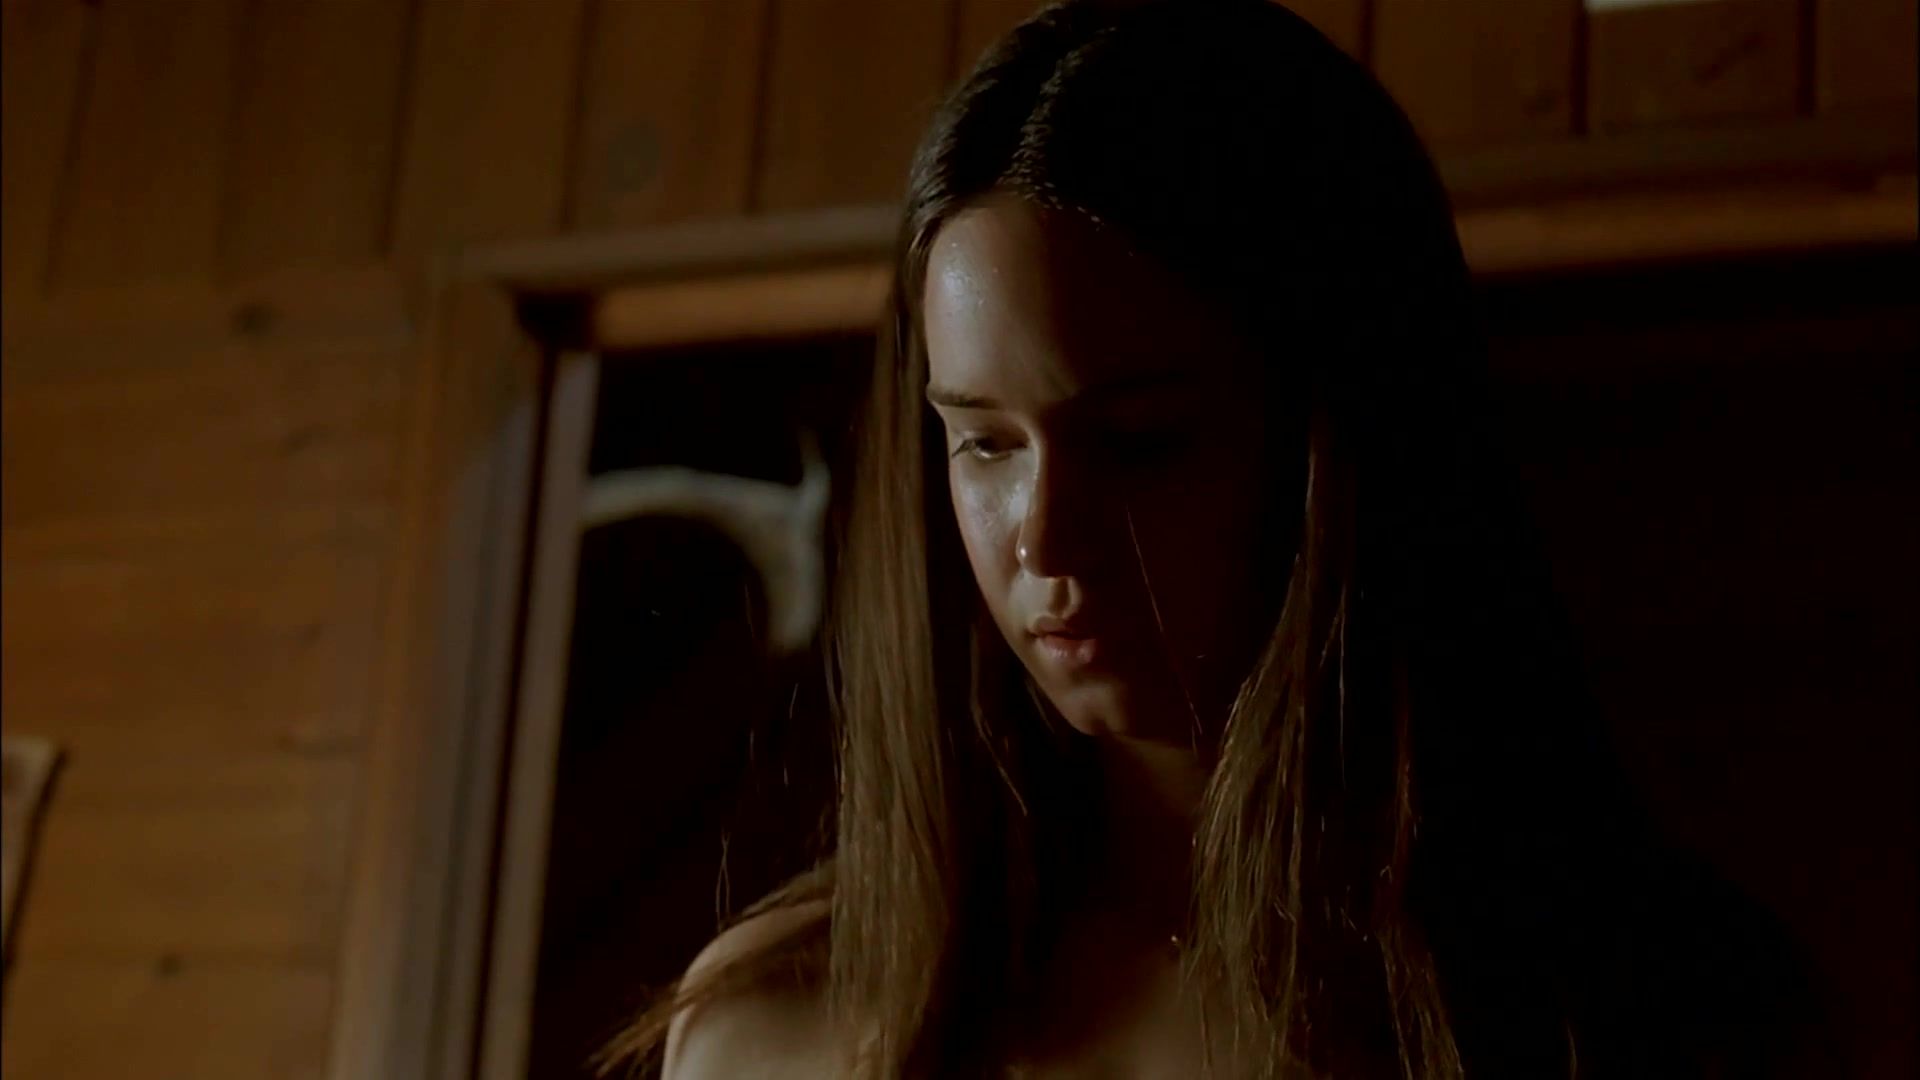 Tugging Naked Katherine Waterston - The Babysitters (2007) Lesbian Sex - 2